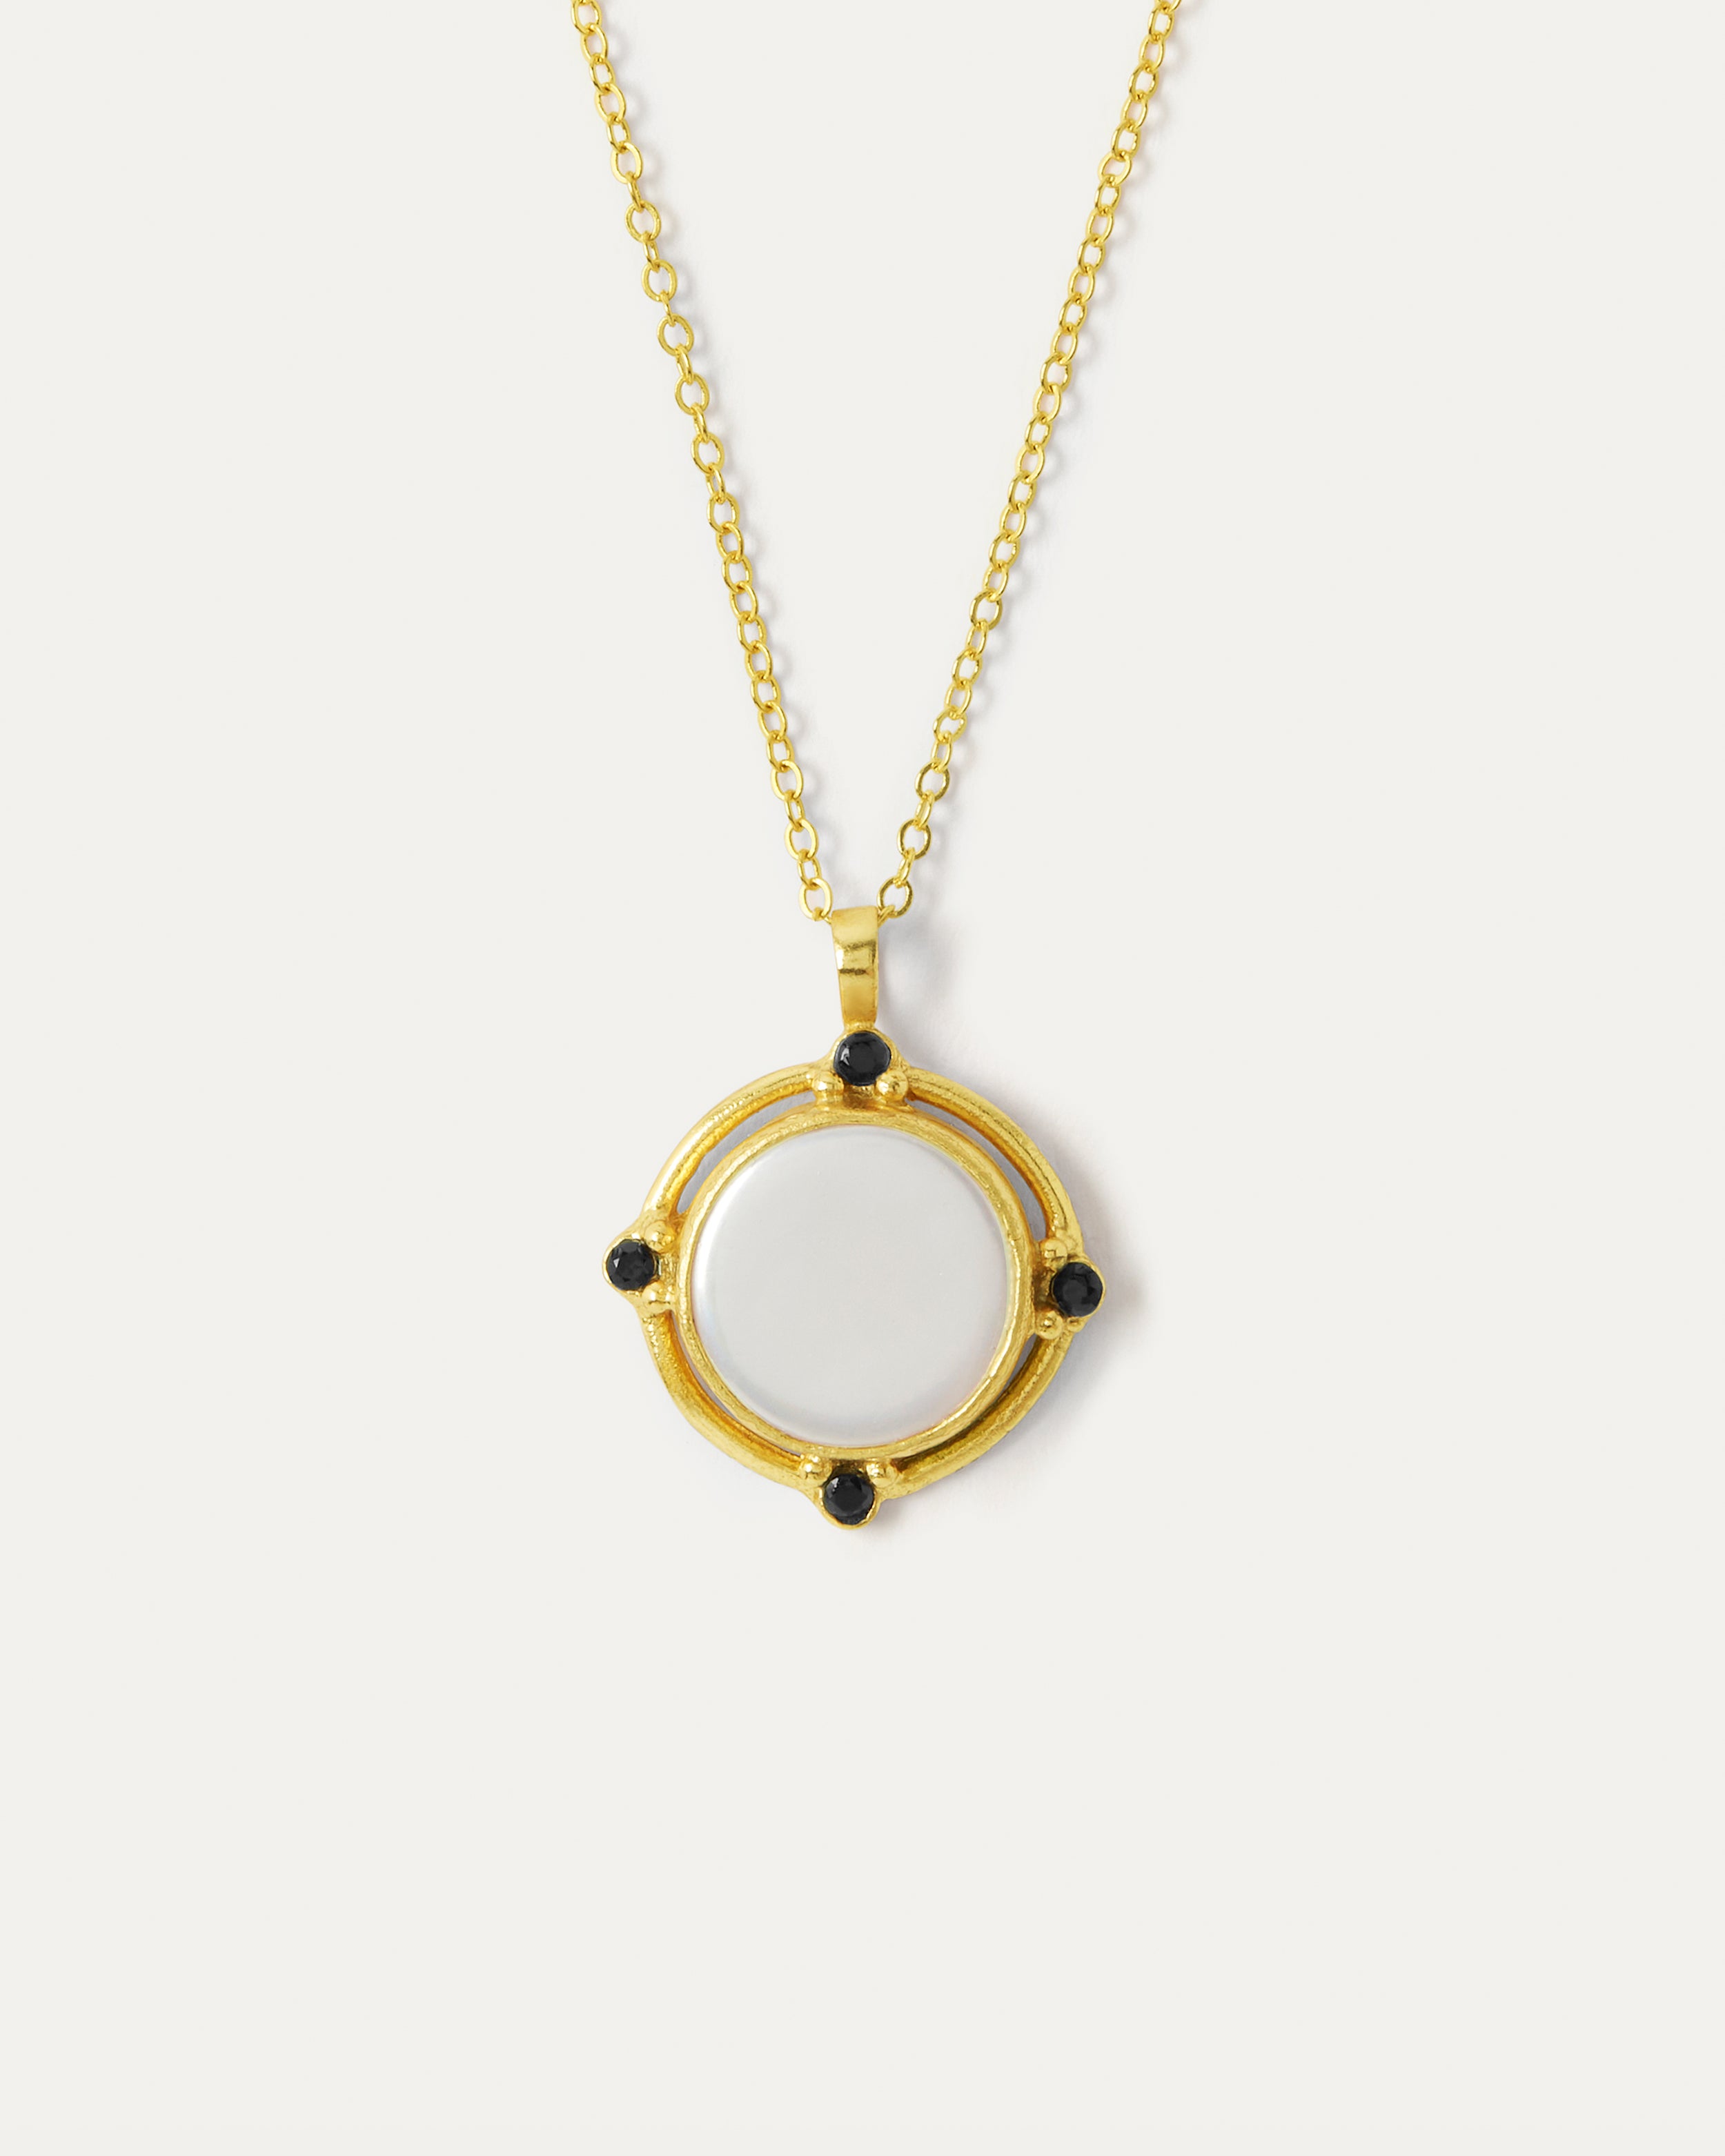 Maeve Pearl Pendant Necklace with Black Crystals | Sustainable Jewellery by Ottoman Hands